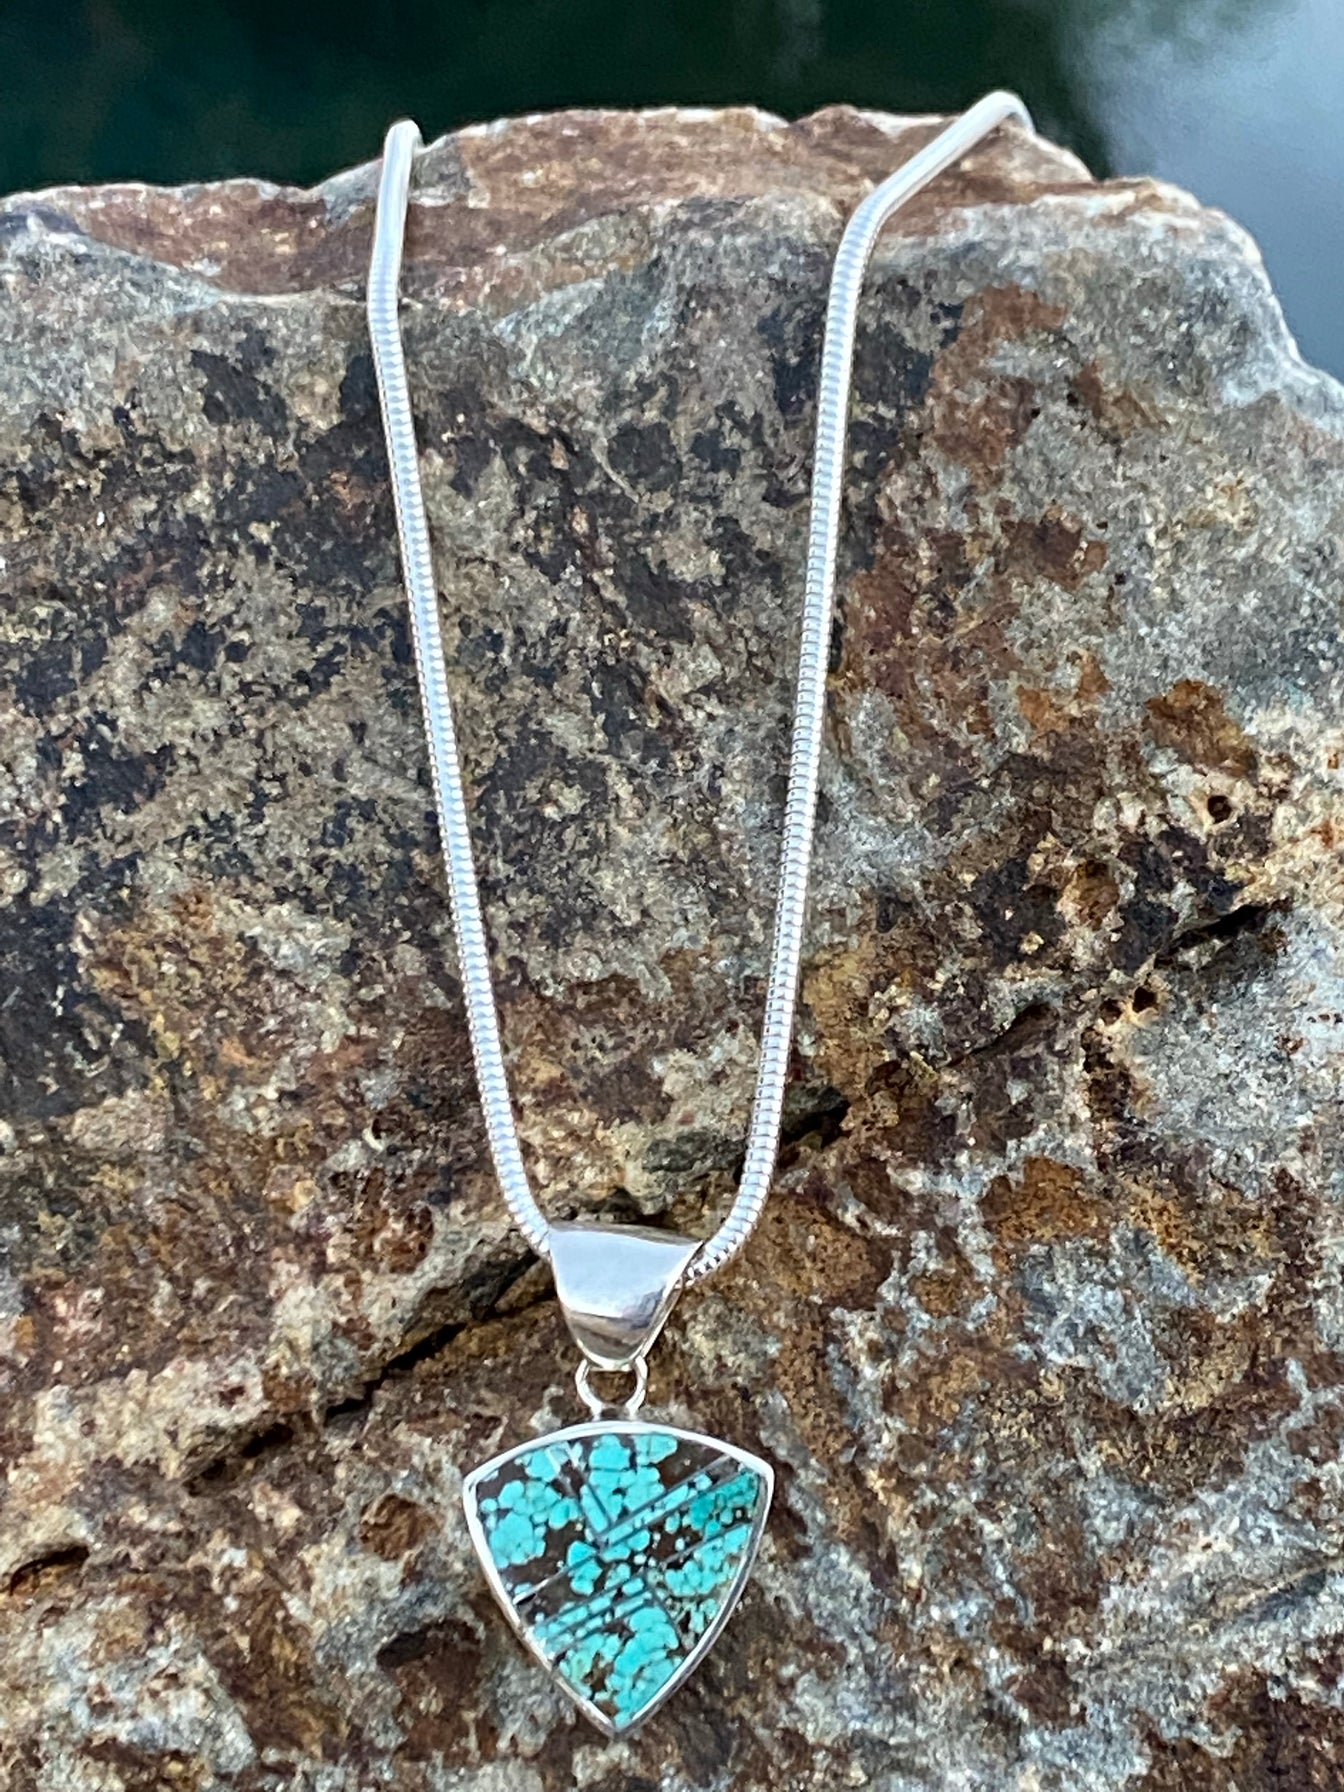 Spider Web Turquoise #8 Triangle Pendant & Sterling Silver Chain